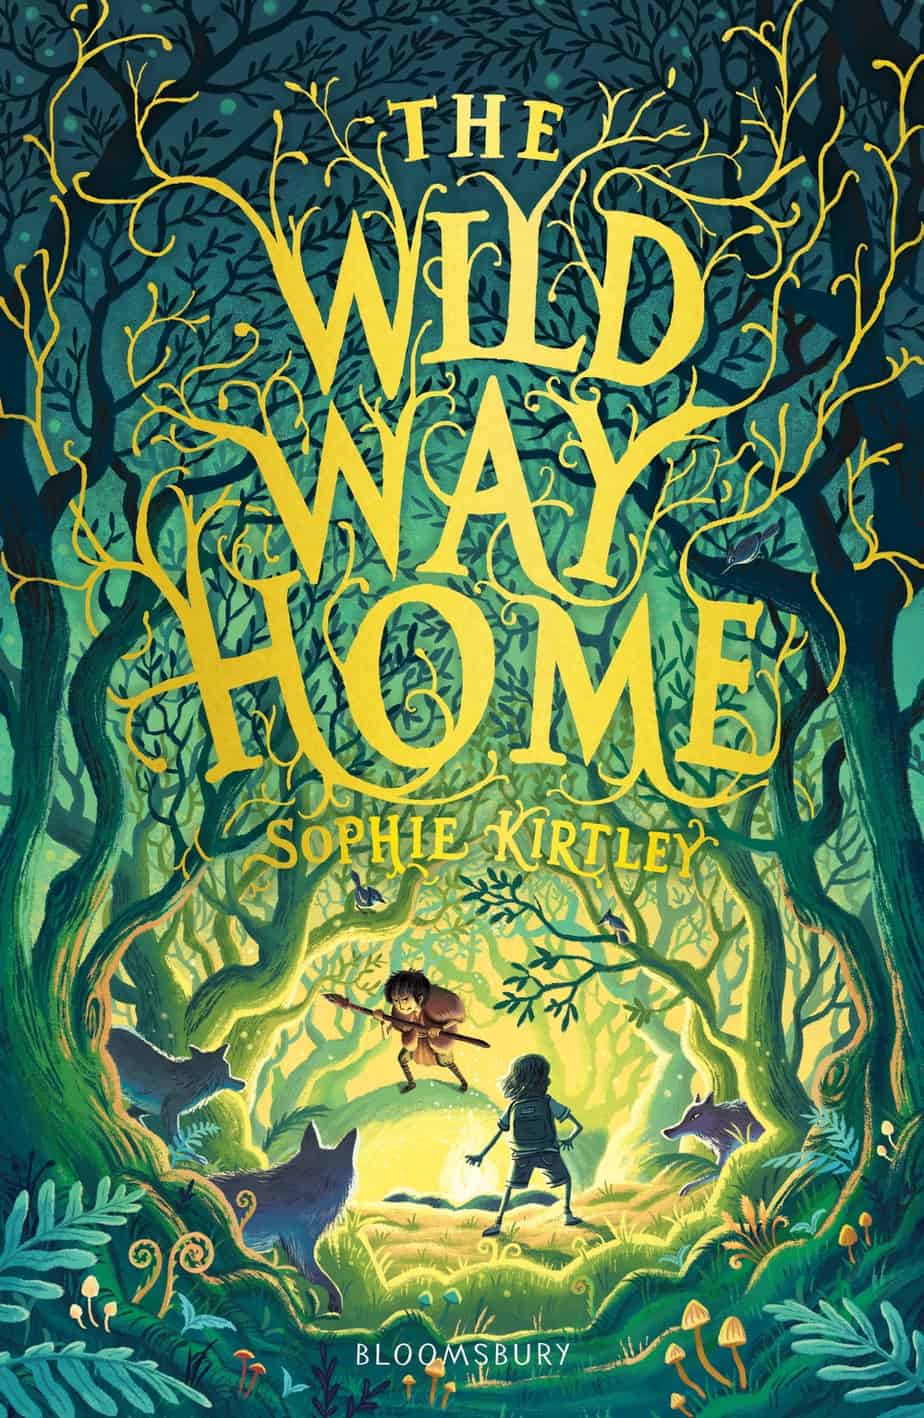 The Wild Way Home by Sophie Kirtley
